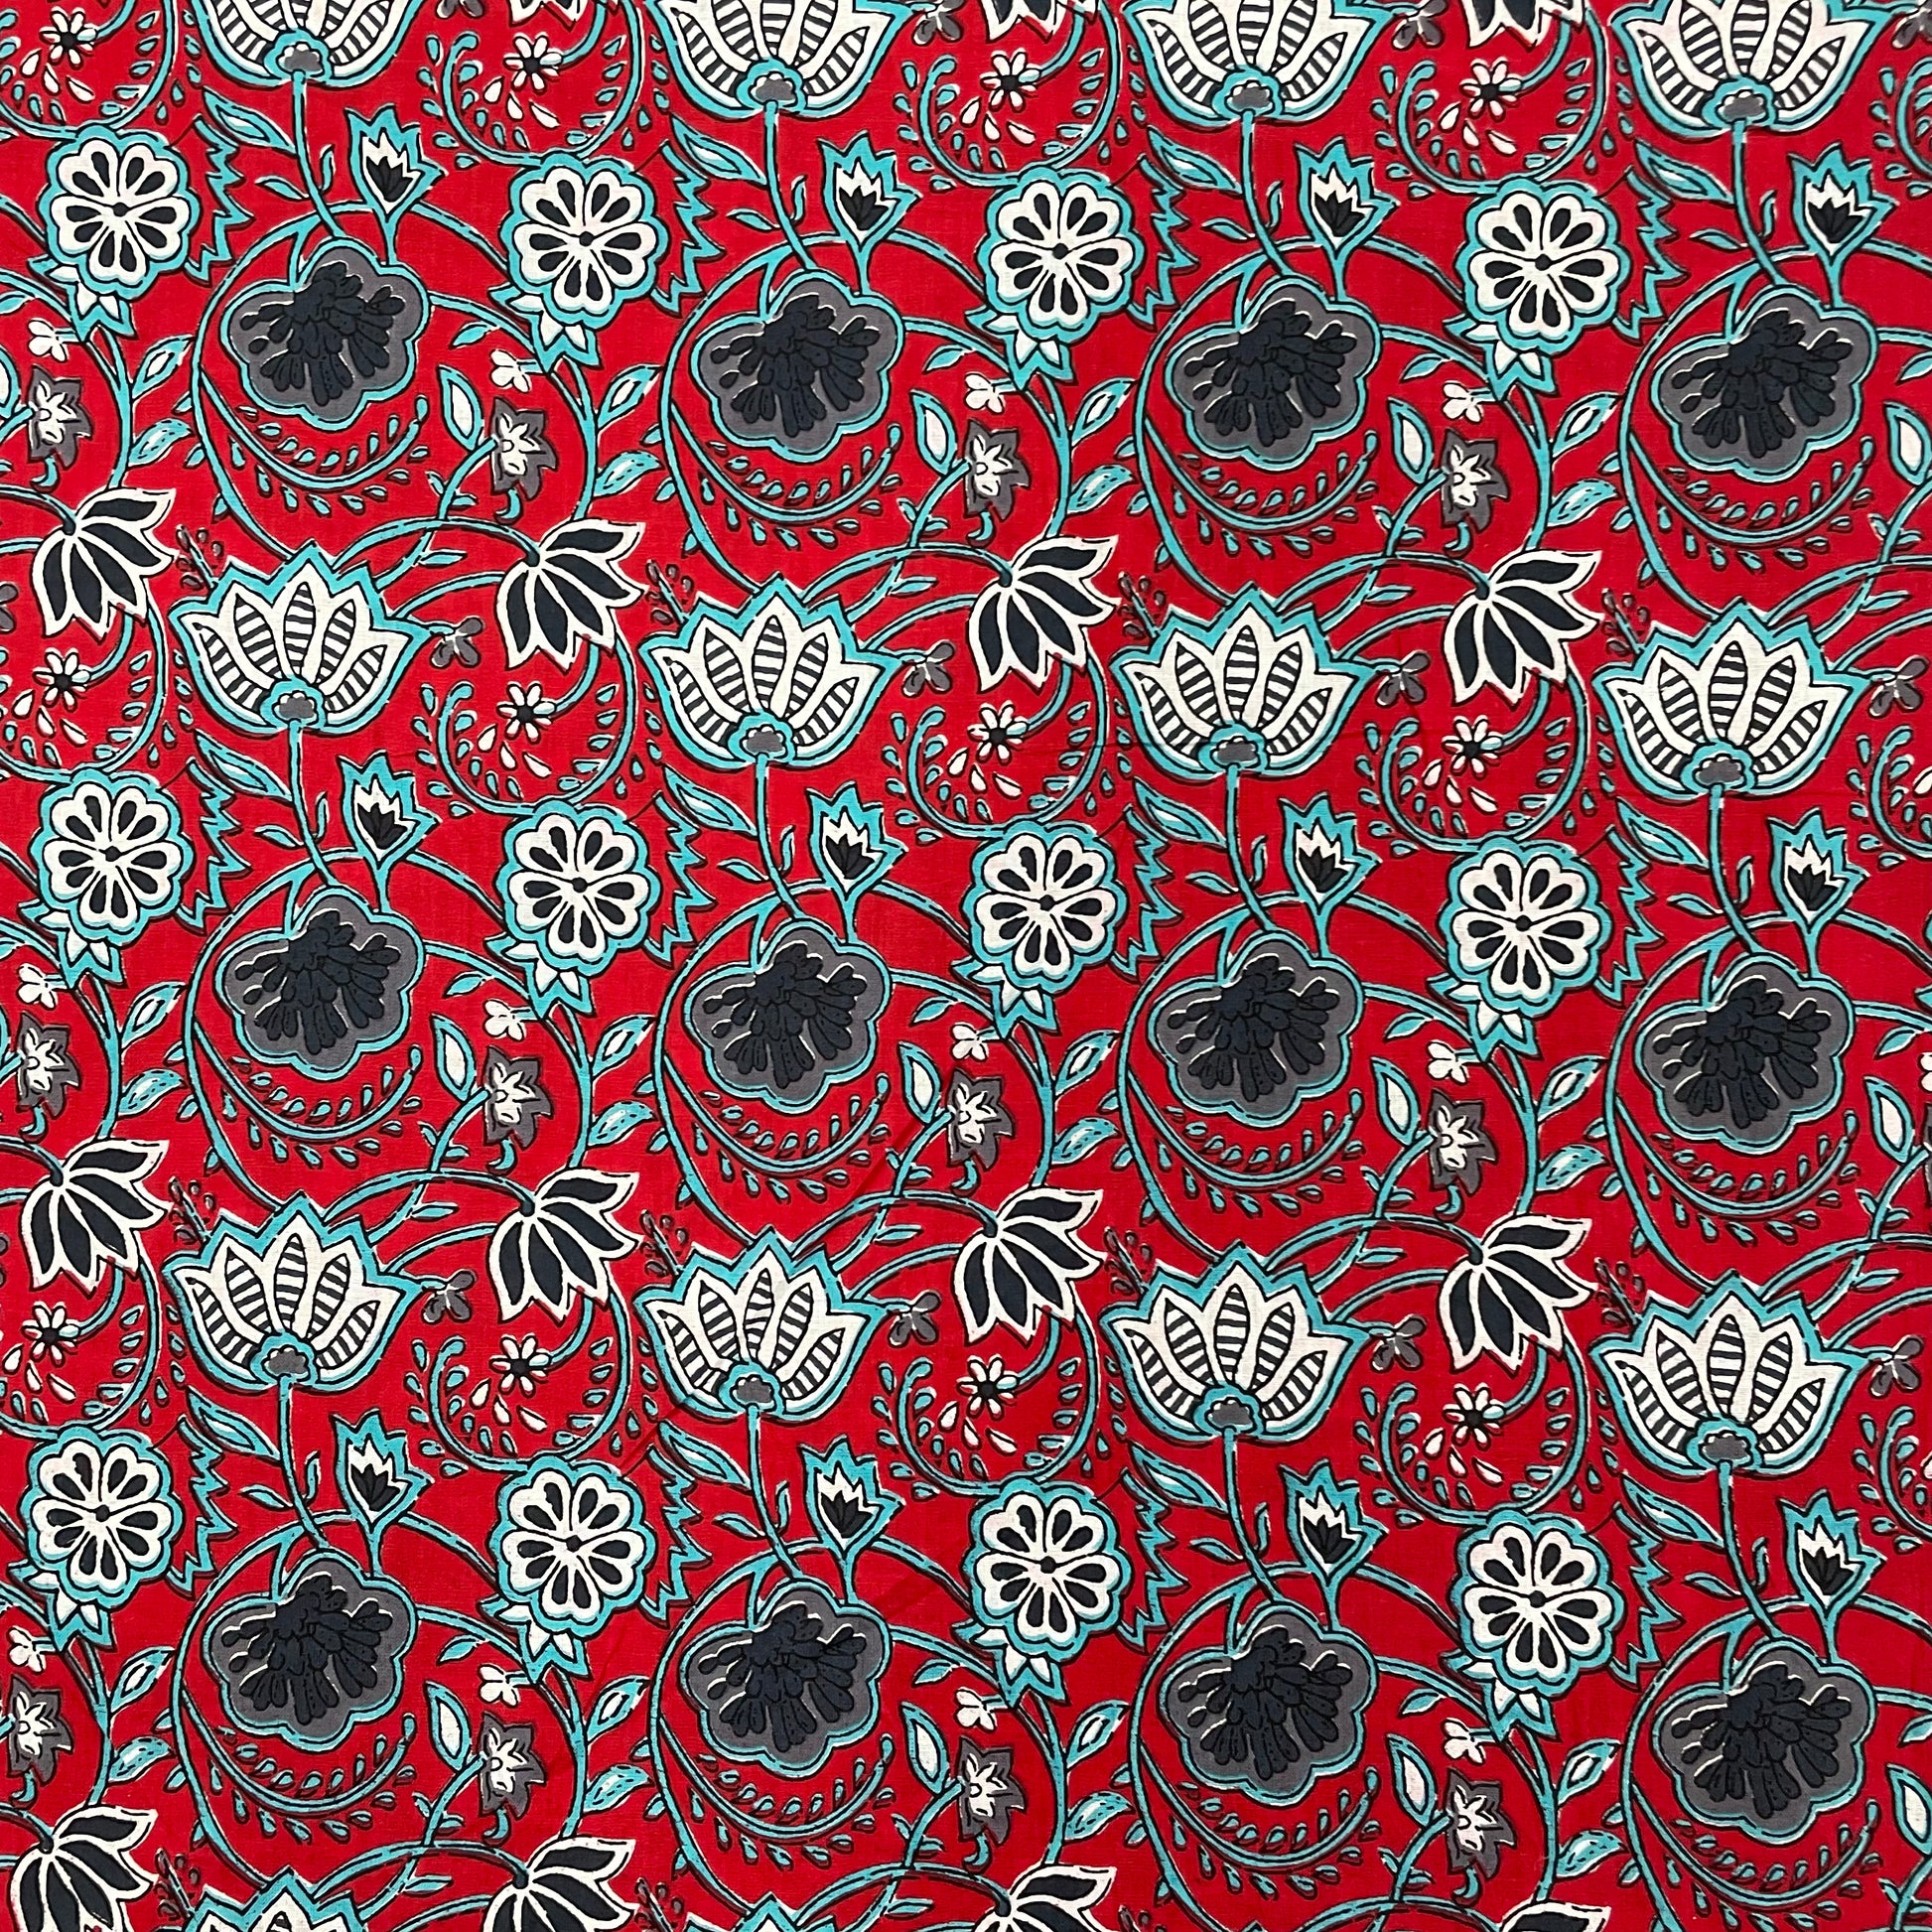 Red With Blue Floral Print Cotton Fabric - TradeUNO